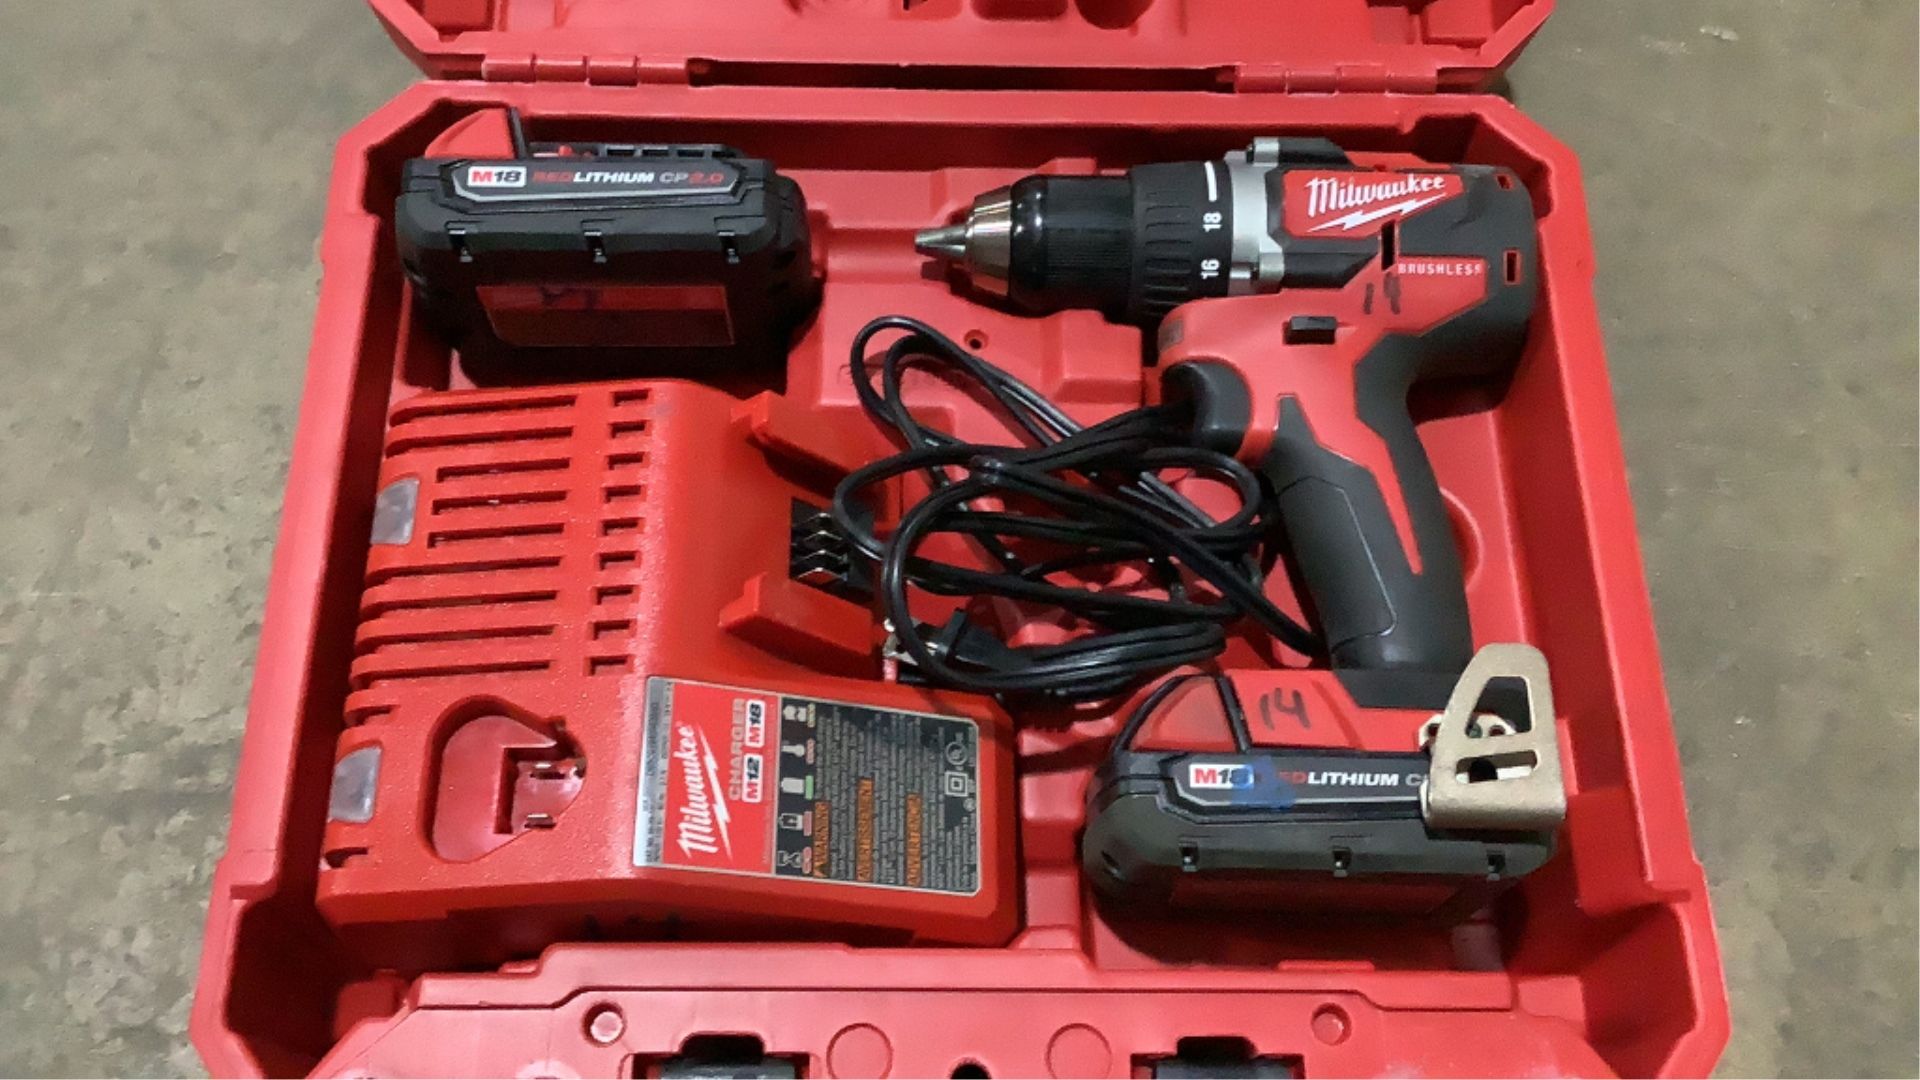 Milwaukee Cordless 1/2" Drill/Driver - Image 3 of 10